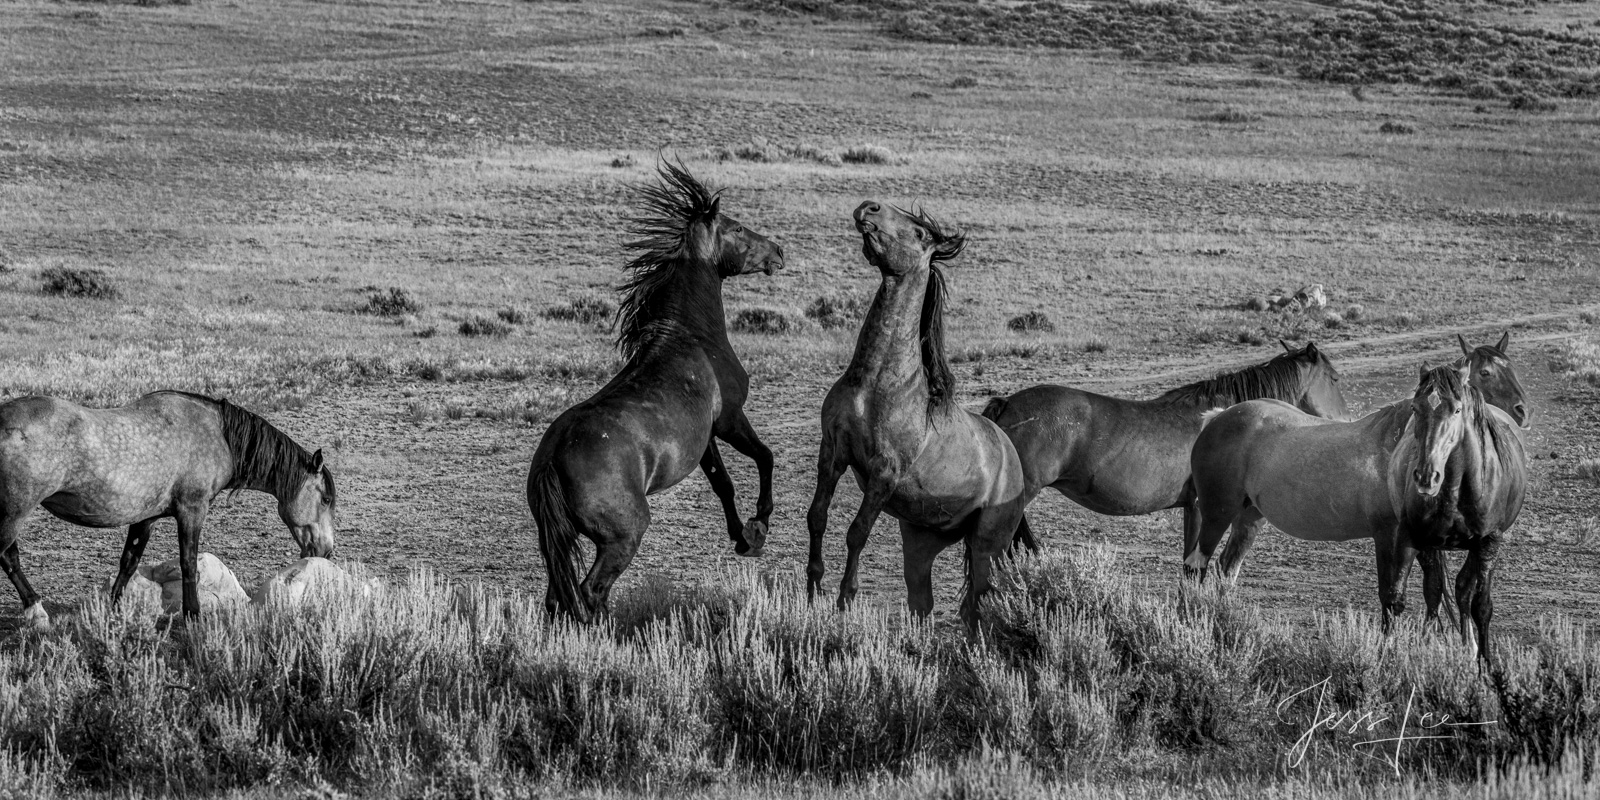 Fine Art Print of Wyoming Wild Horse fights. Limited Edition of 250 Luxurious Prints.  Choose the style, size, and medium for...